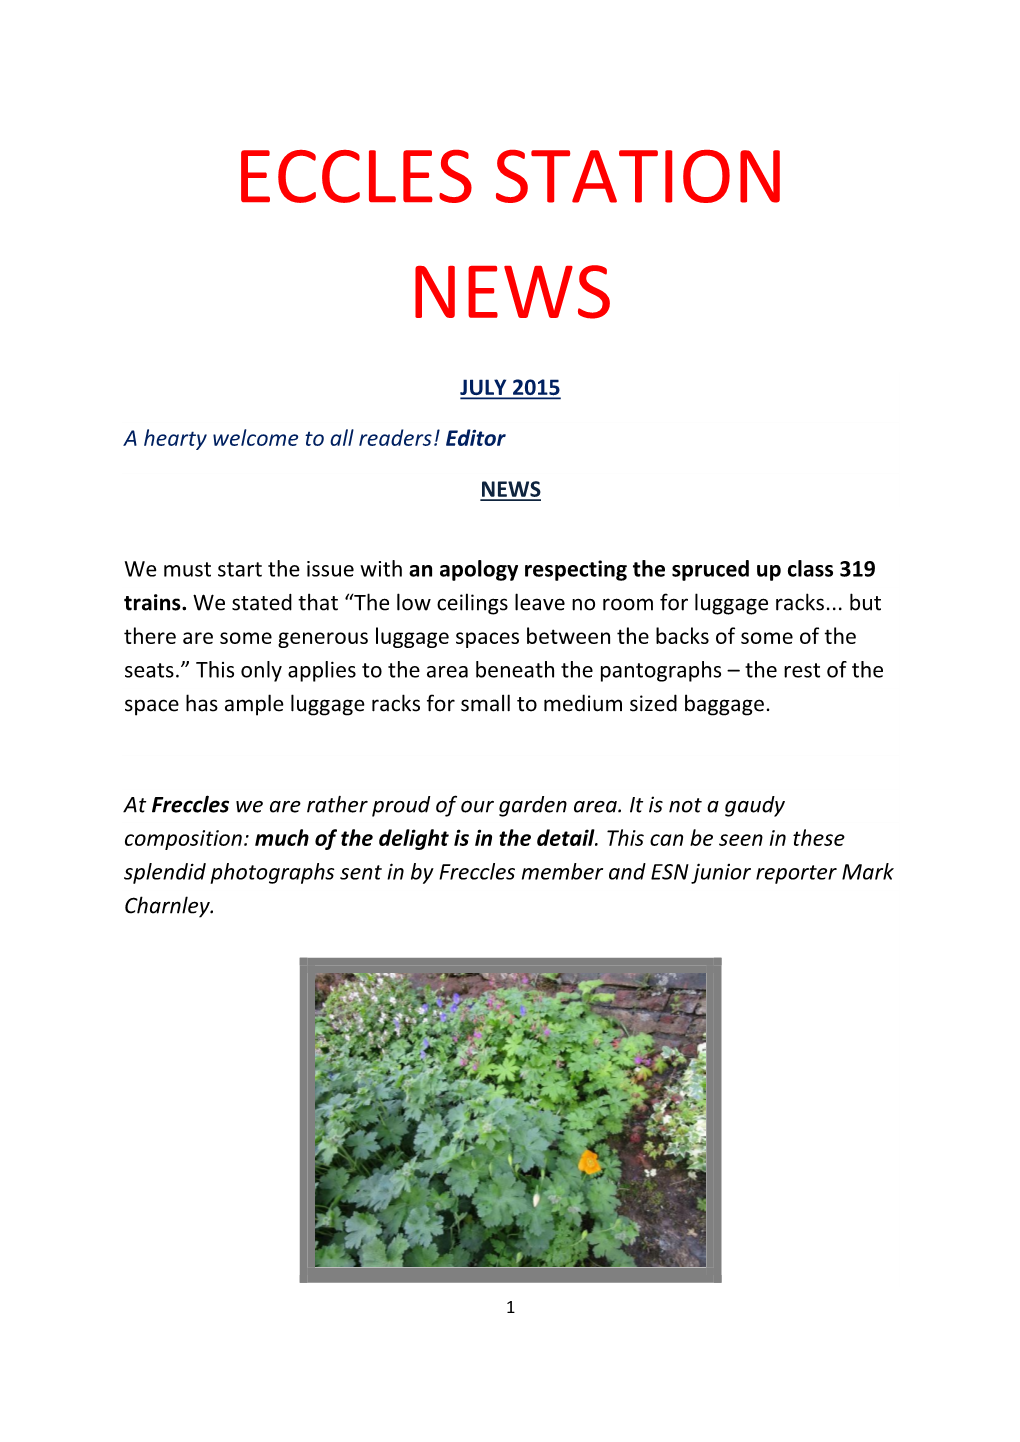 Eccles Station News Welcomes Feedback from Readers